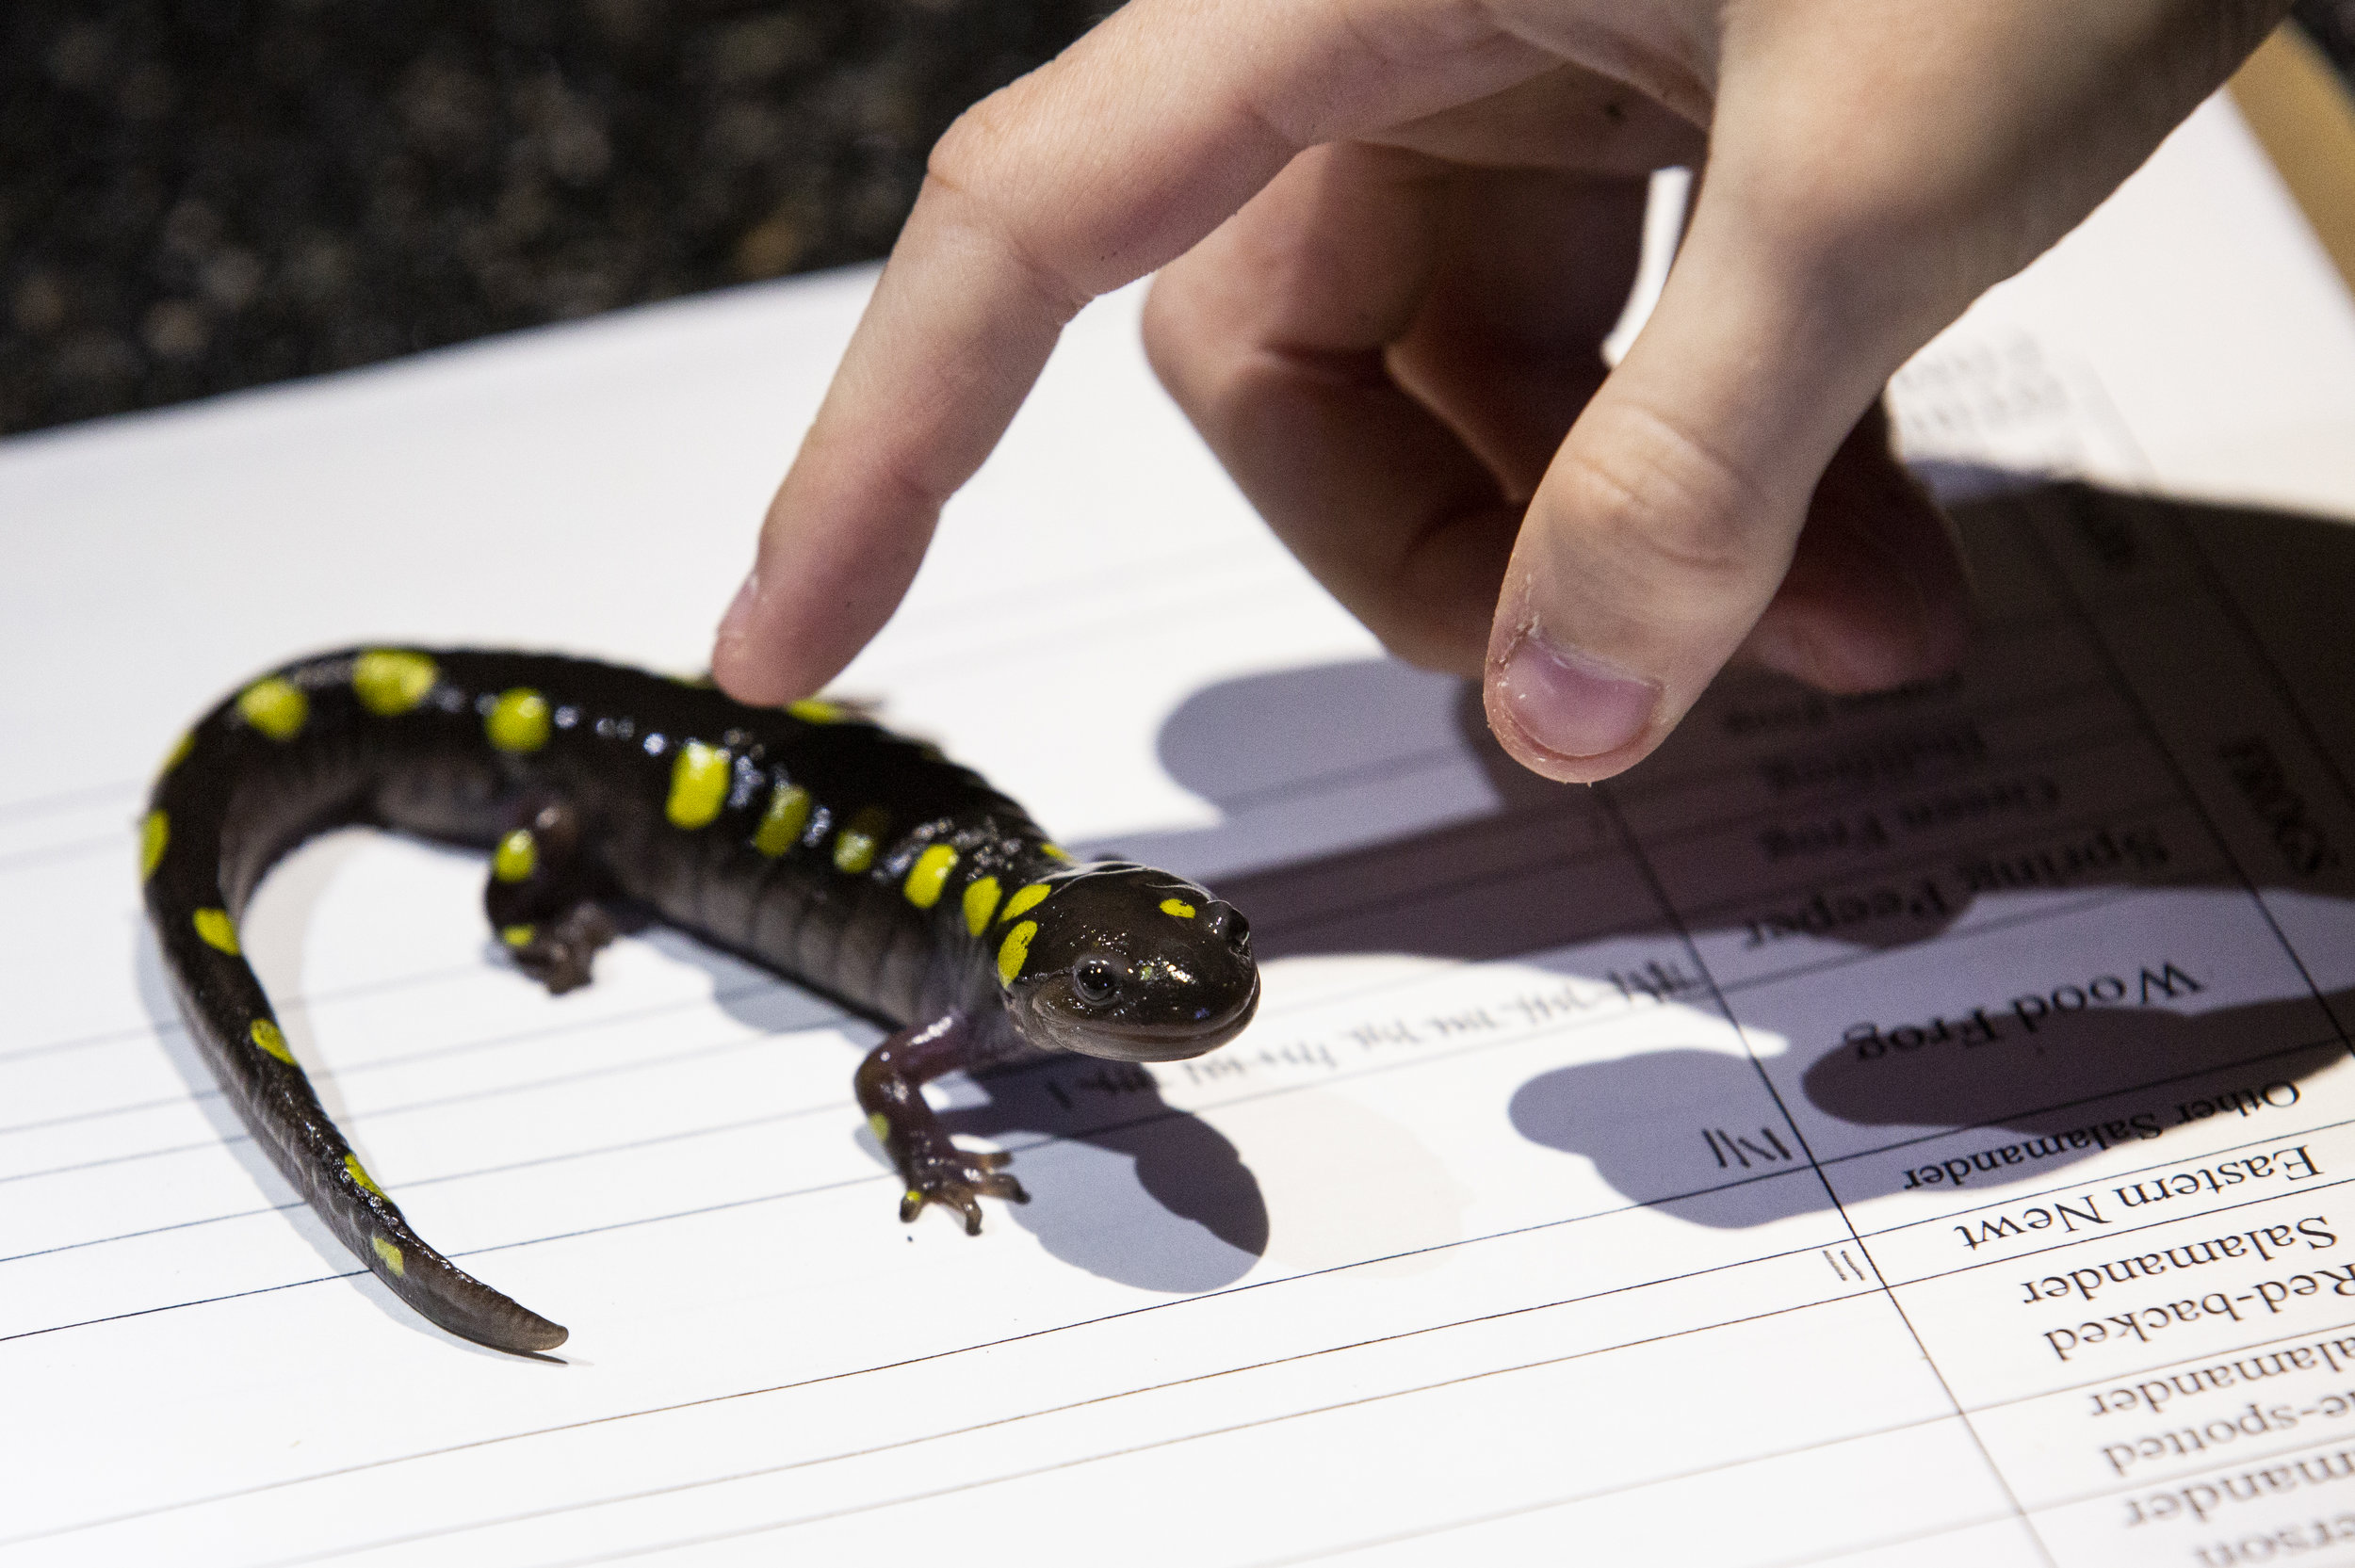  A spotted salamander is transported to a volunteer’s clipboard, where it will be photographed and then quickly released back to the woods. Spotted salamanders have two distinct rows of yellow dots that are as unique and individualistic as a human’s 